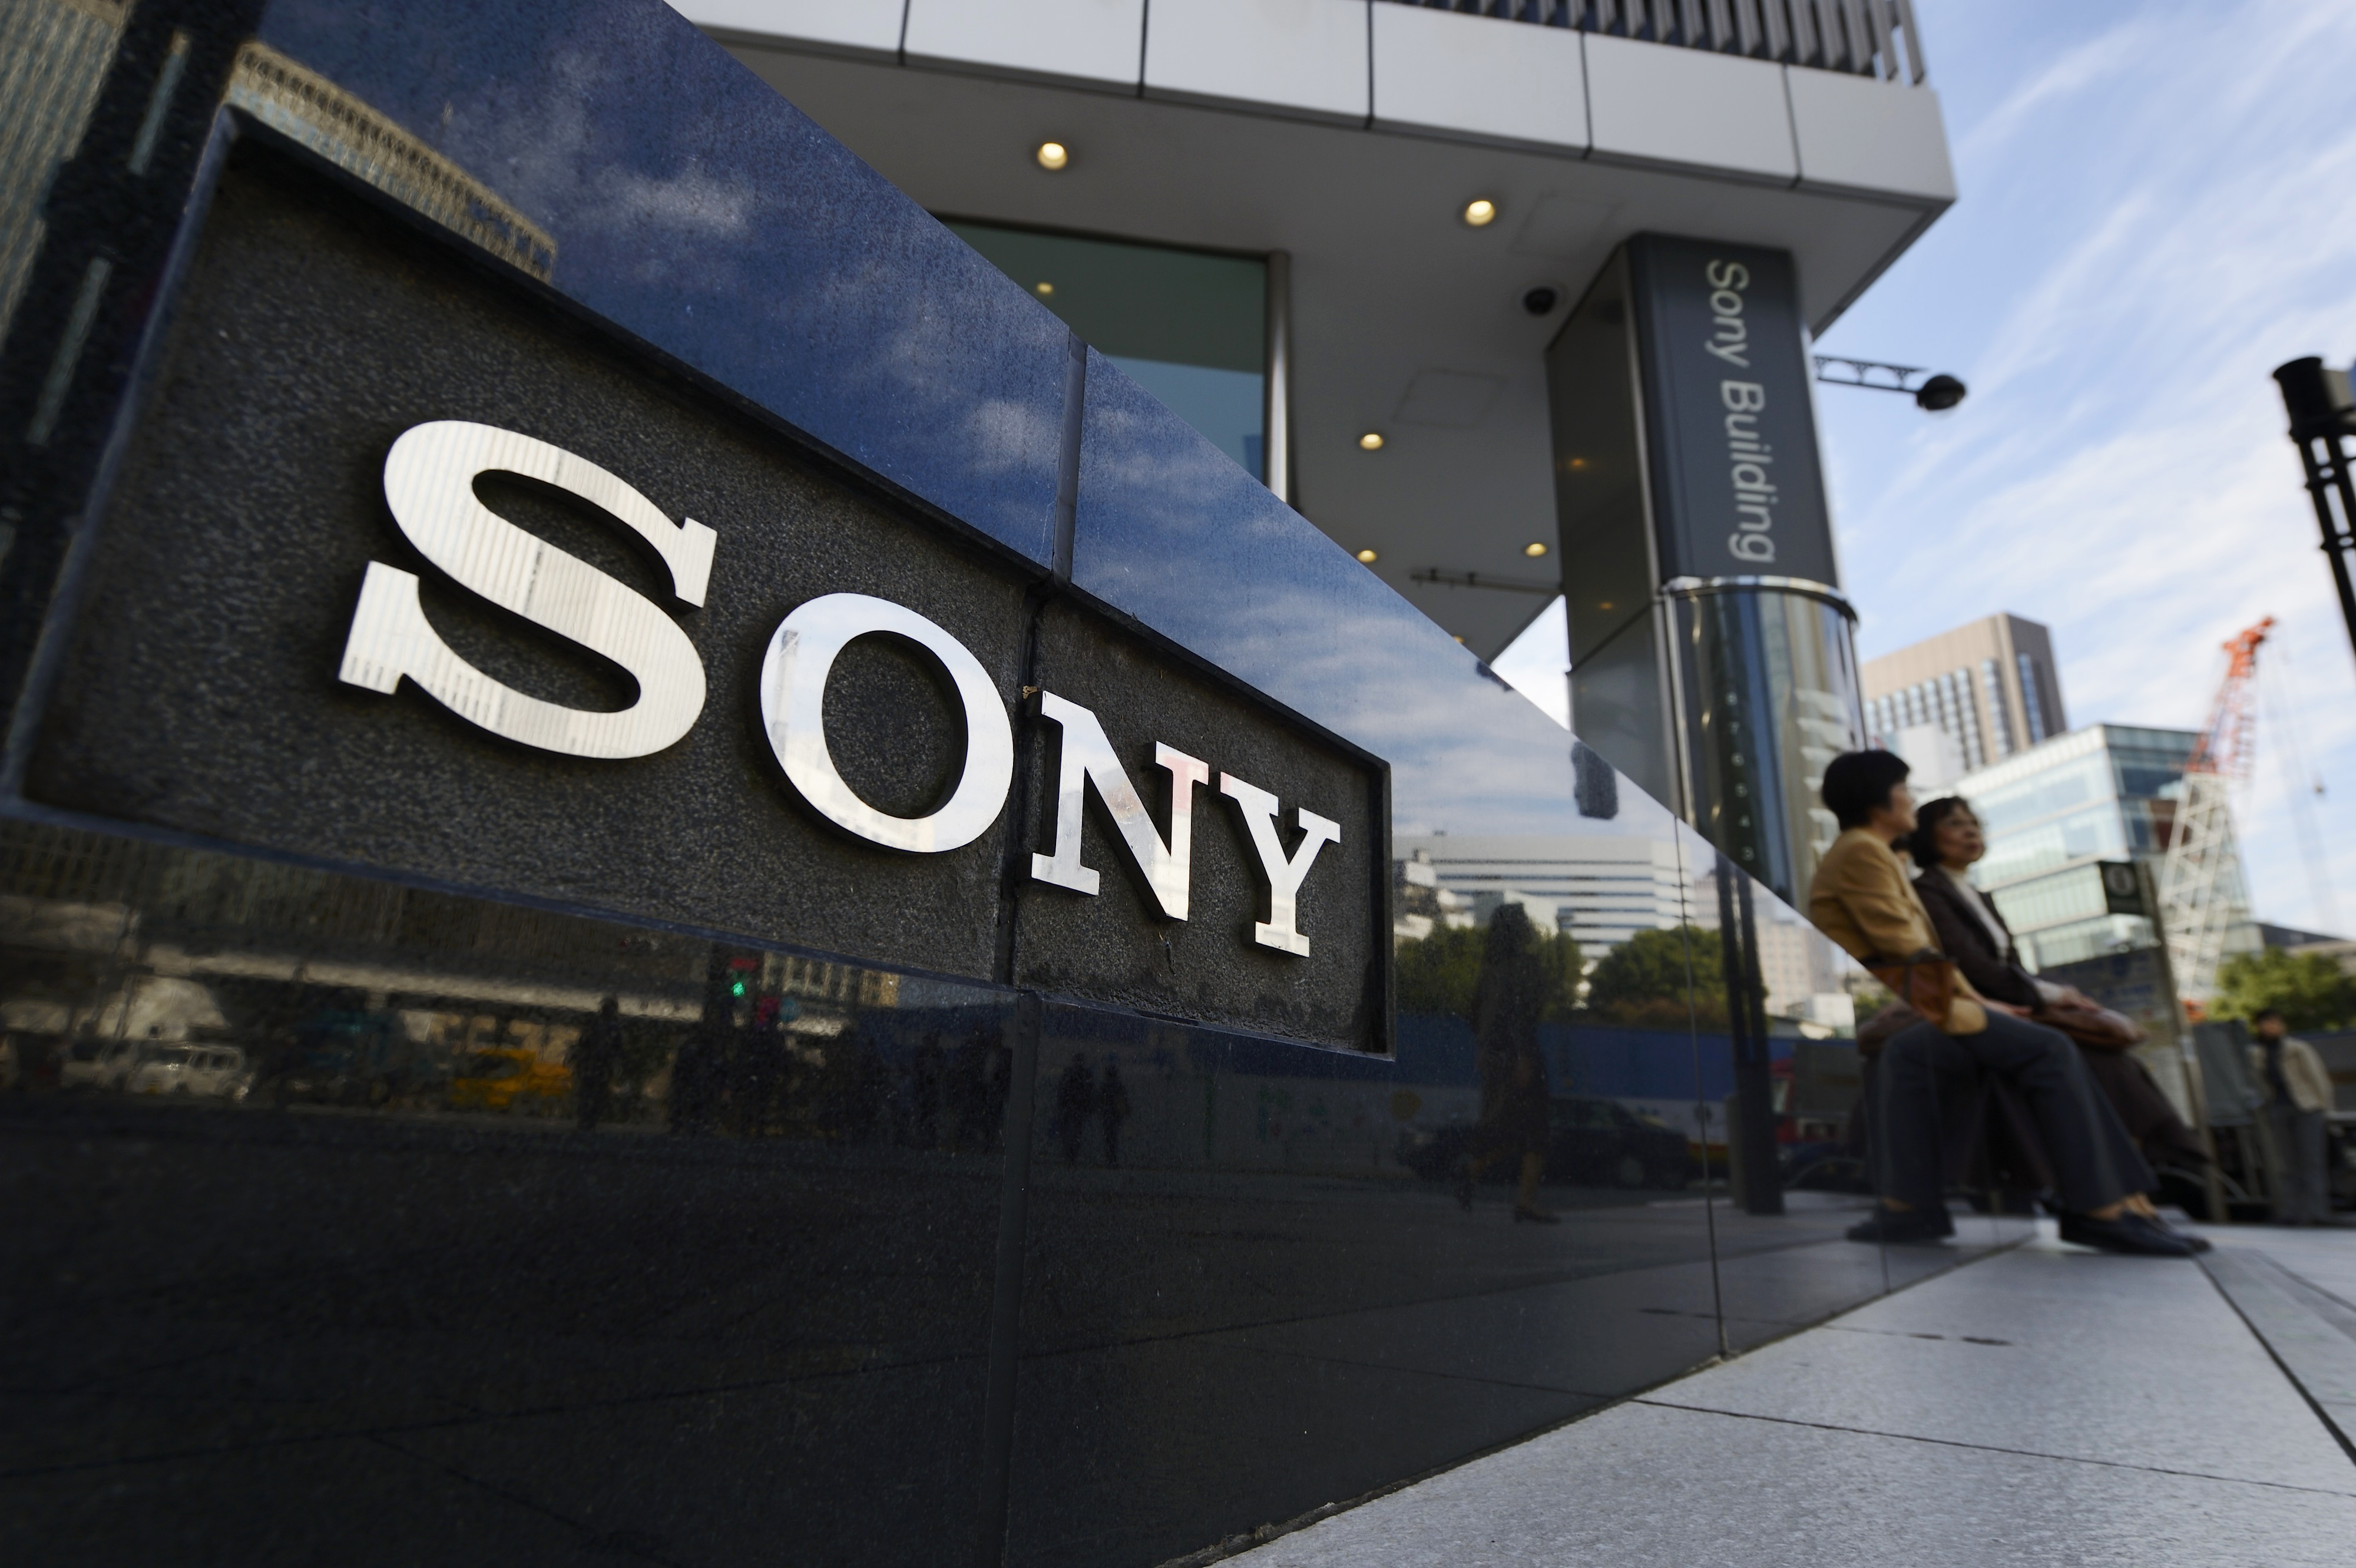 The Sony Corp. logo is displayed outside the company's showroom in Tokyo on Oct. 30, 2013.